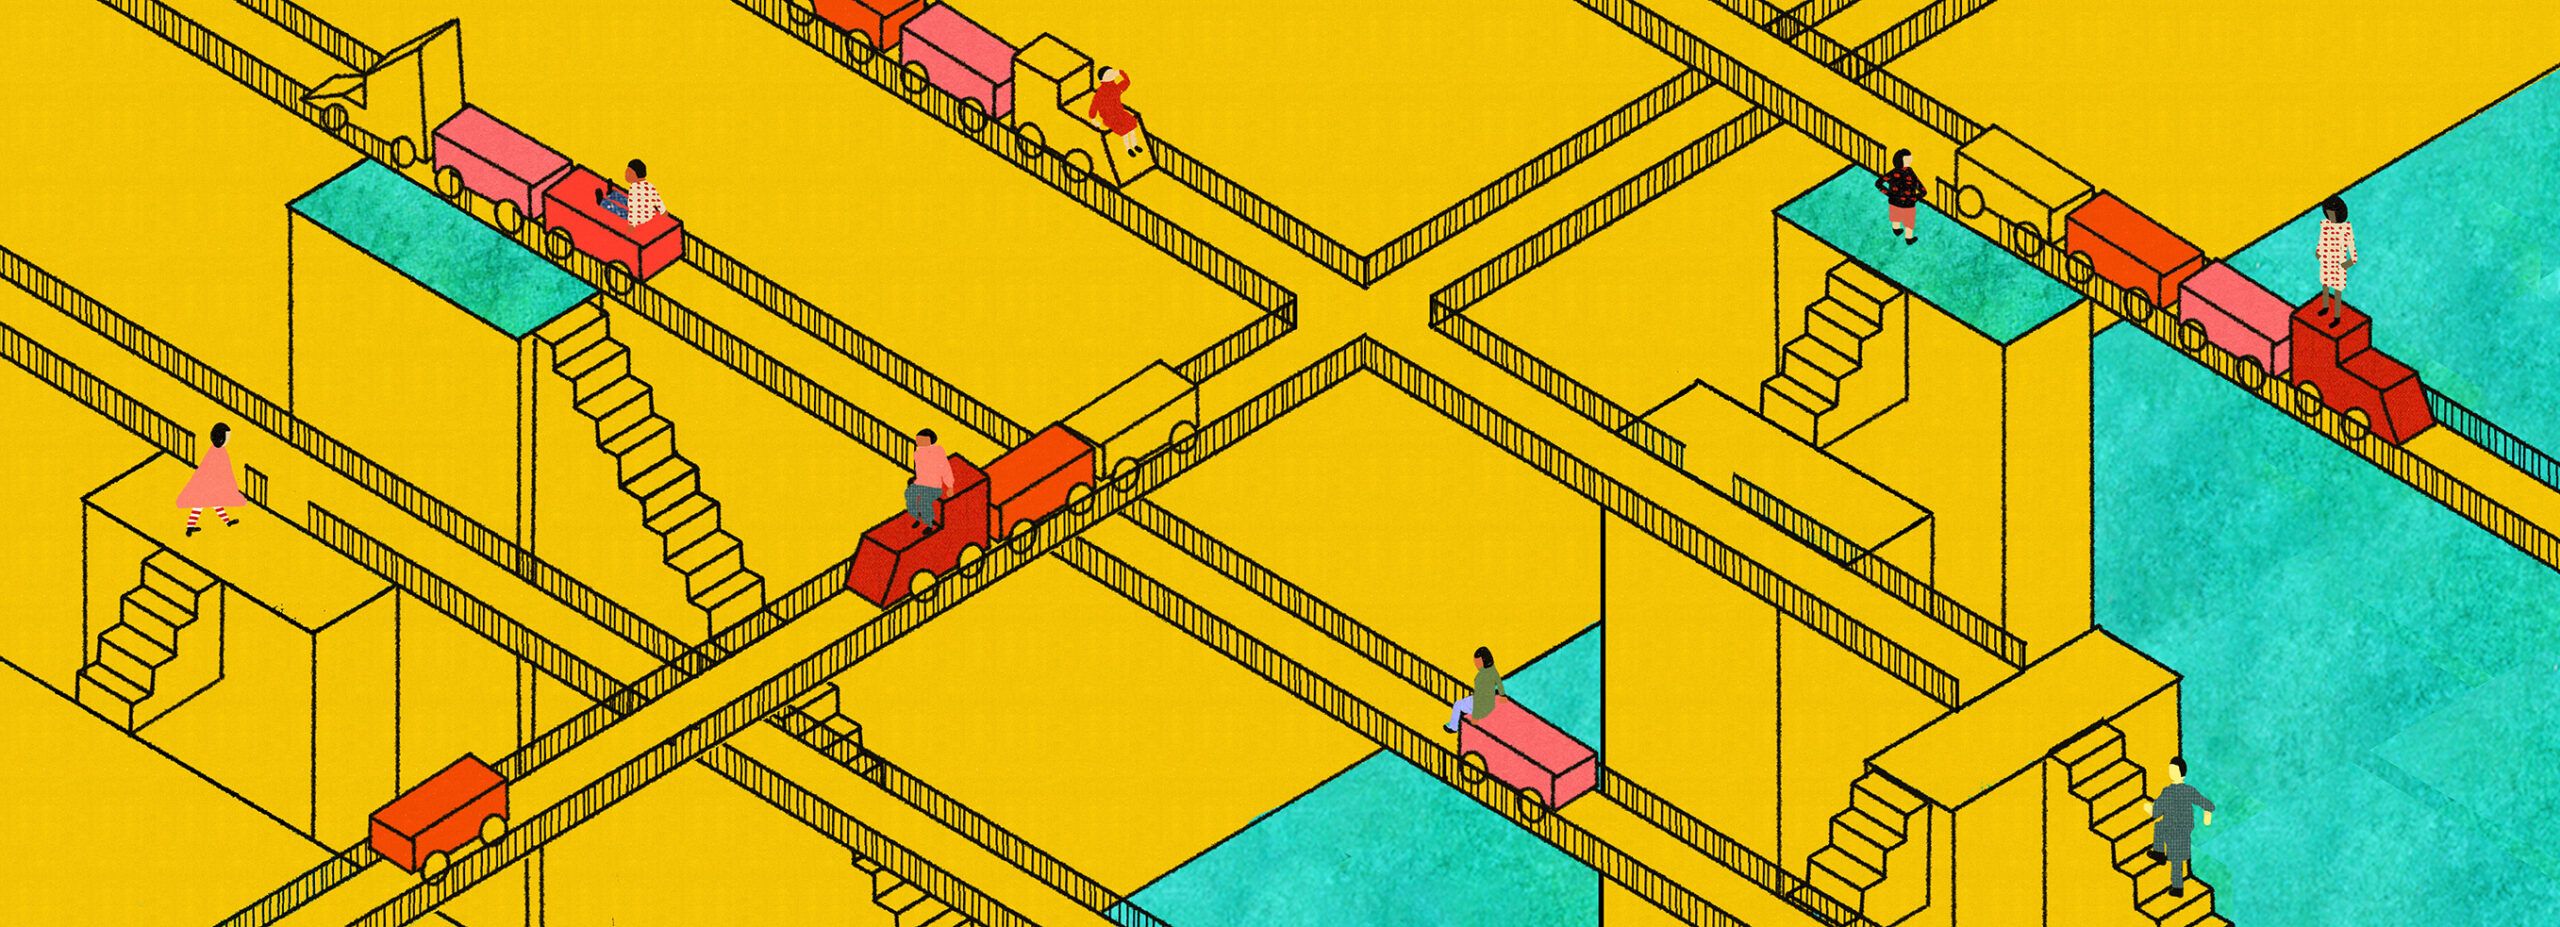 Illustration shows yellow landscape with blue sections and a lot of trains on paths with kids on the trains, going different directions.